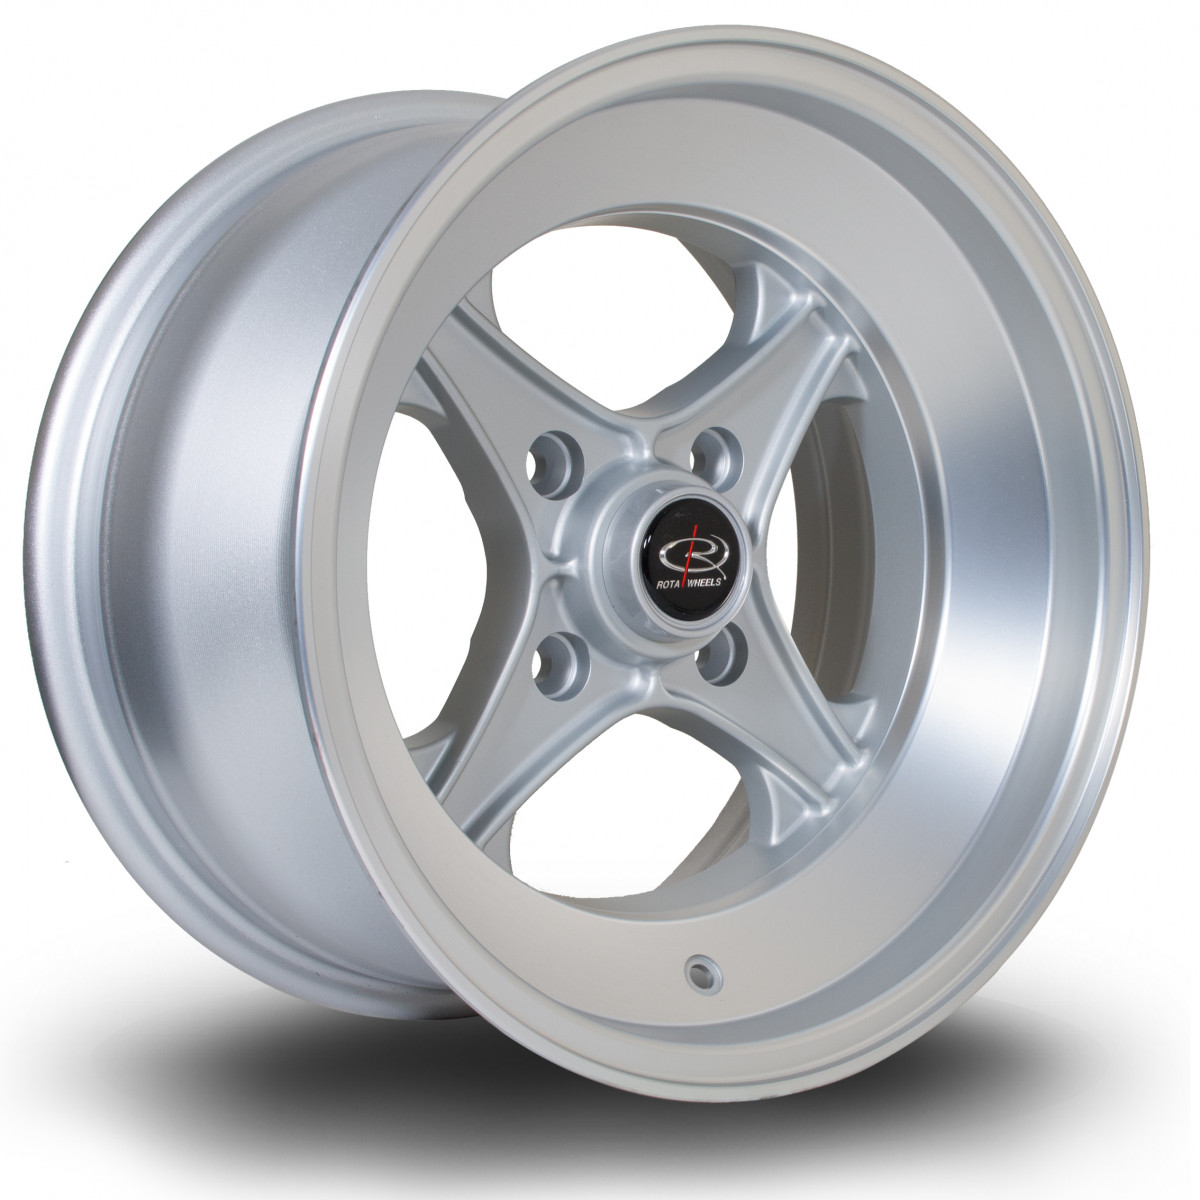 X04 15x8 4x114 ET0 Silver with Matte Polished Face